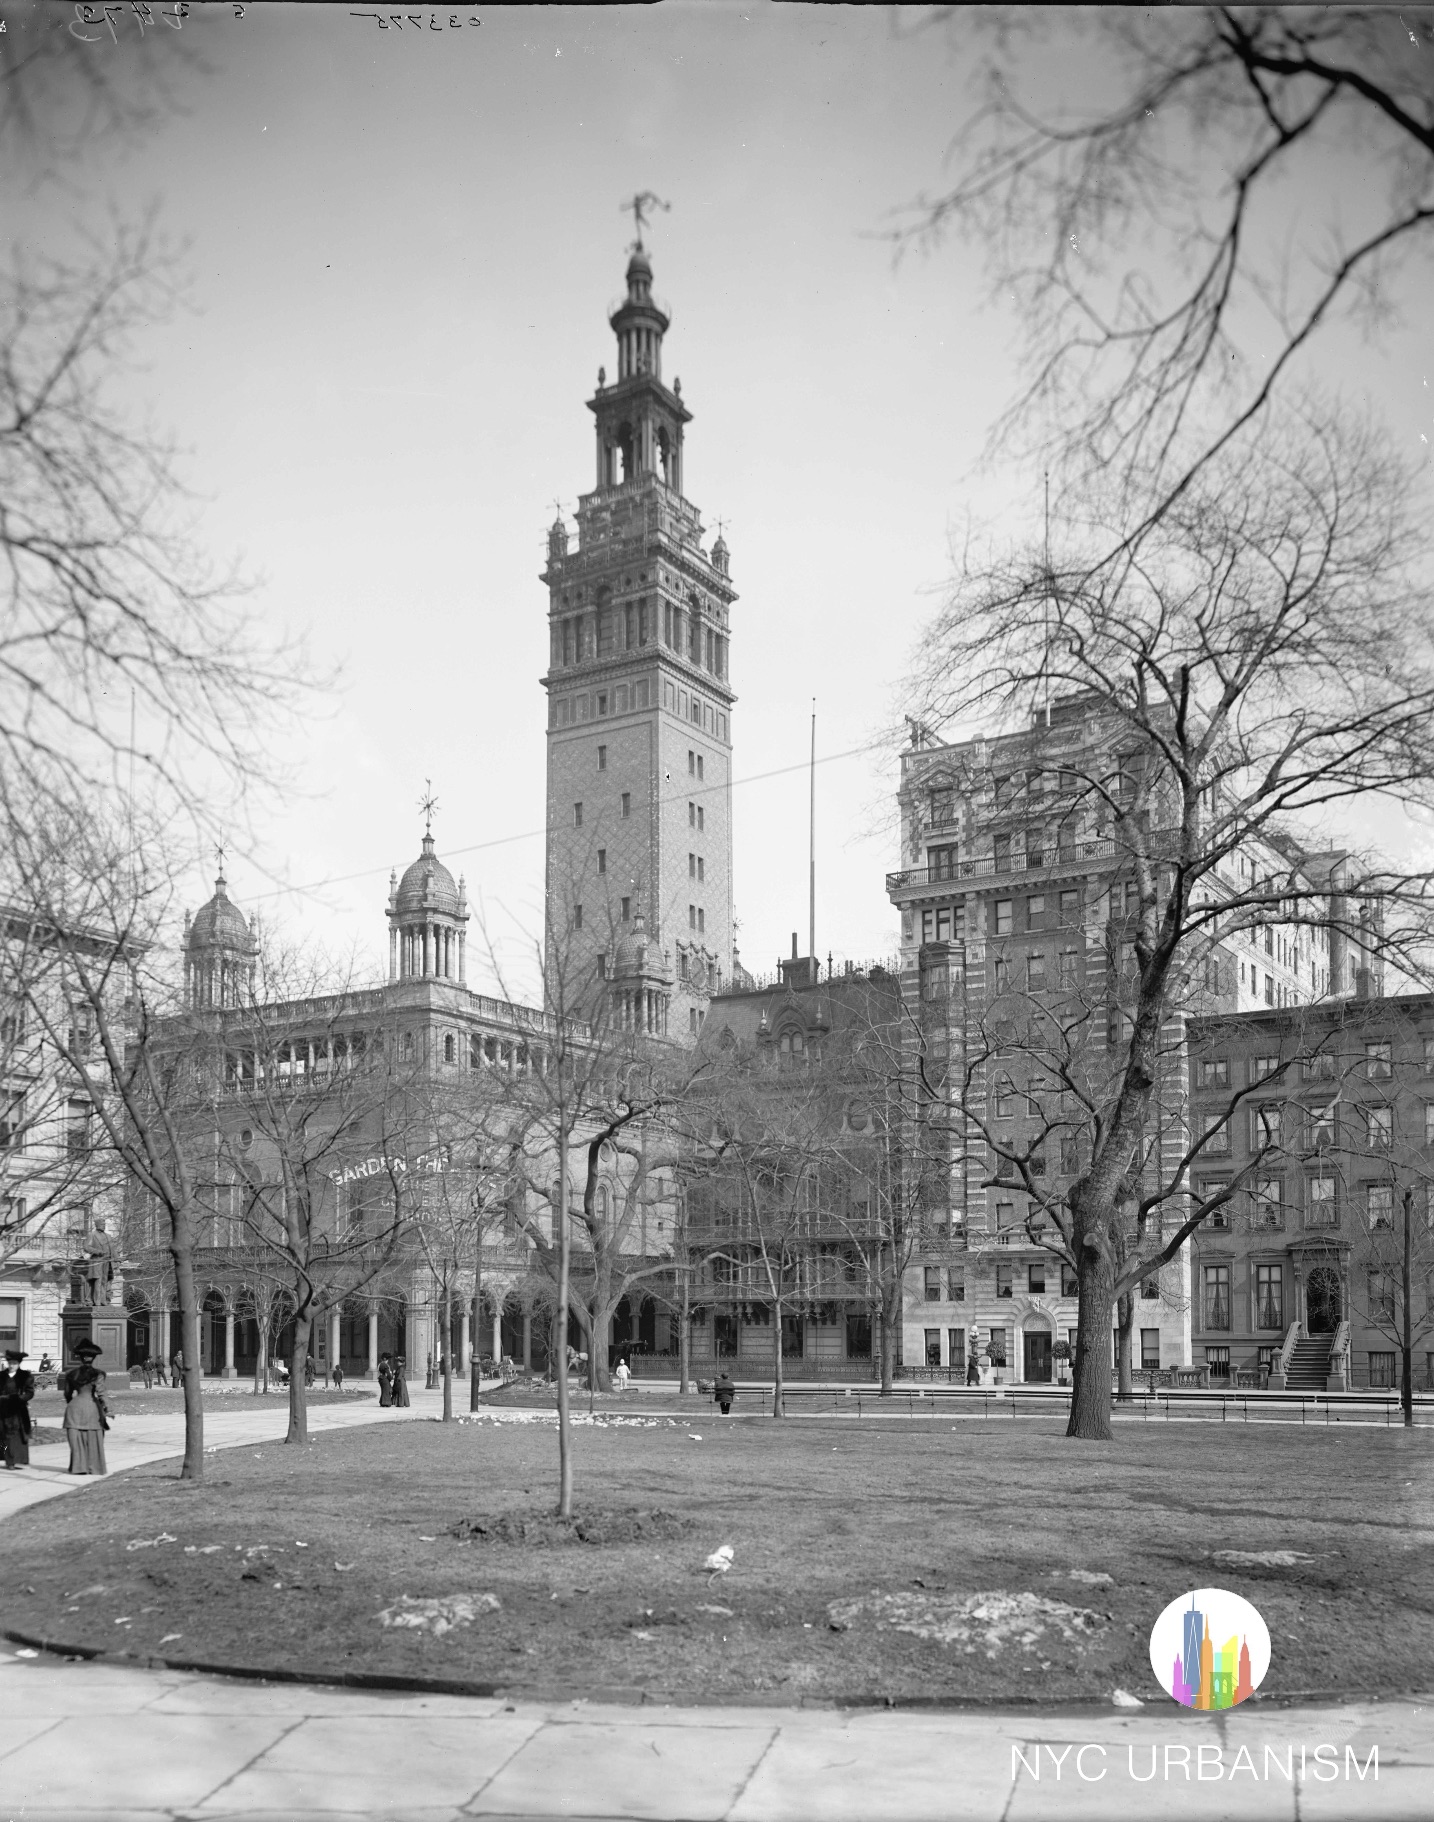 OLD MADISON SQUARE GARDEN & PARK NYC 1905 8x10 SILVER HALIDE PHOTO PRINT 